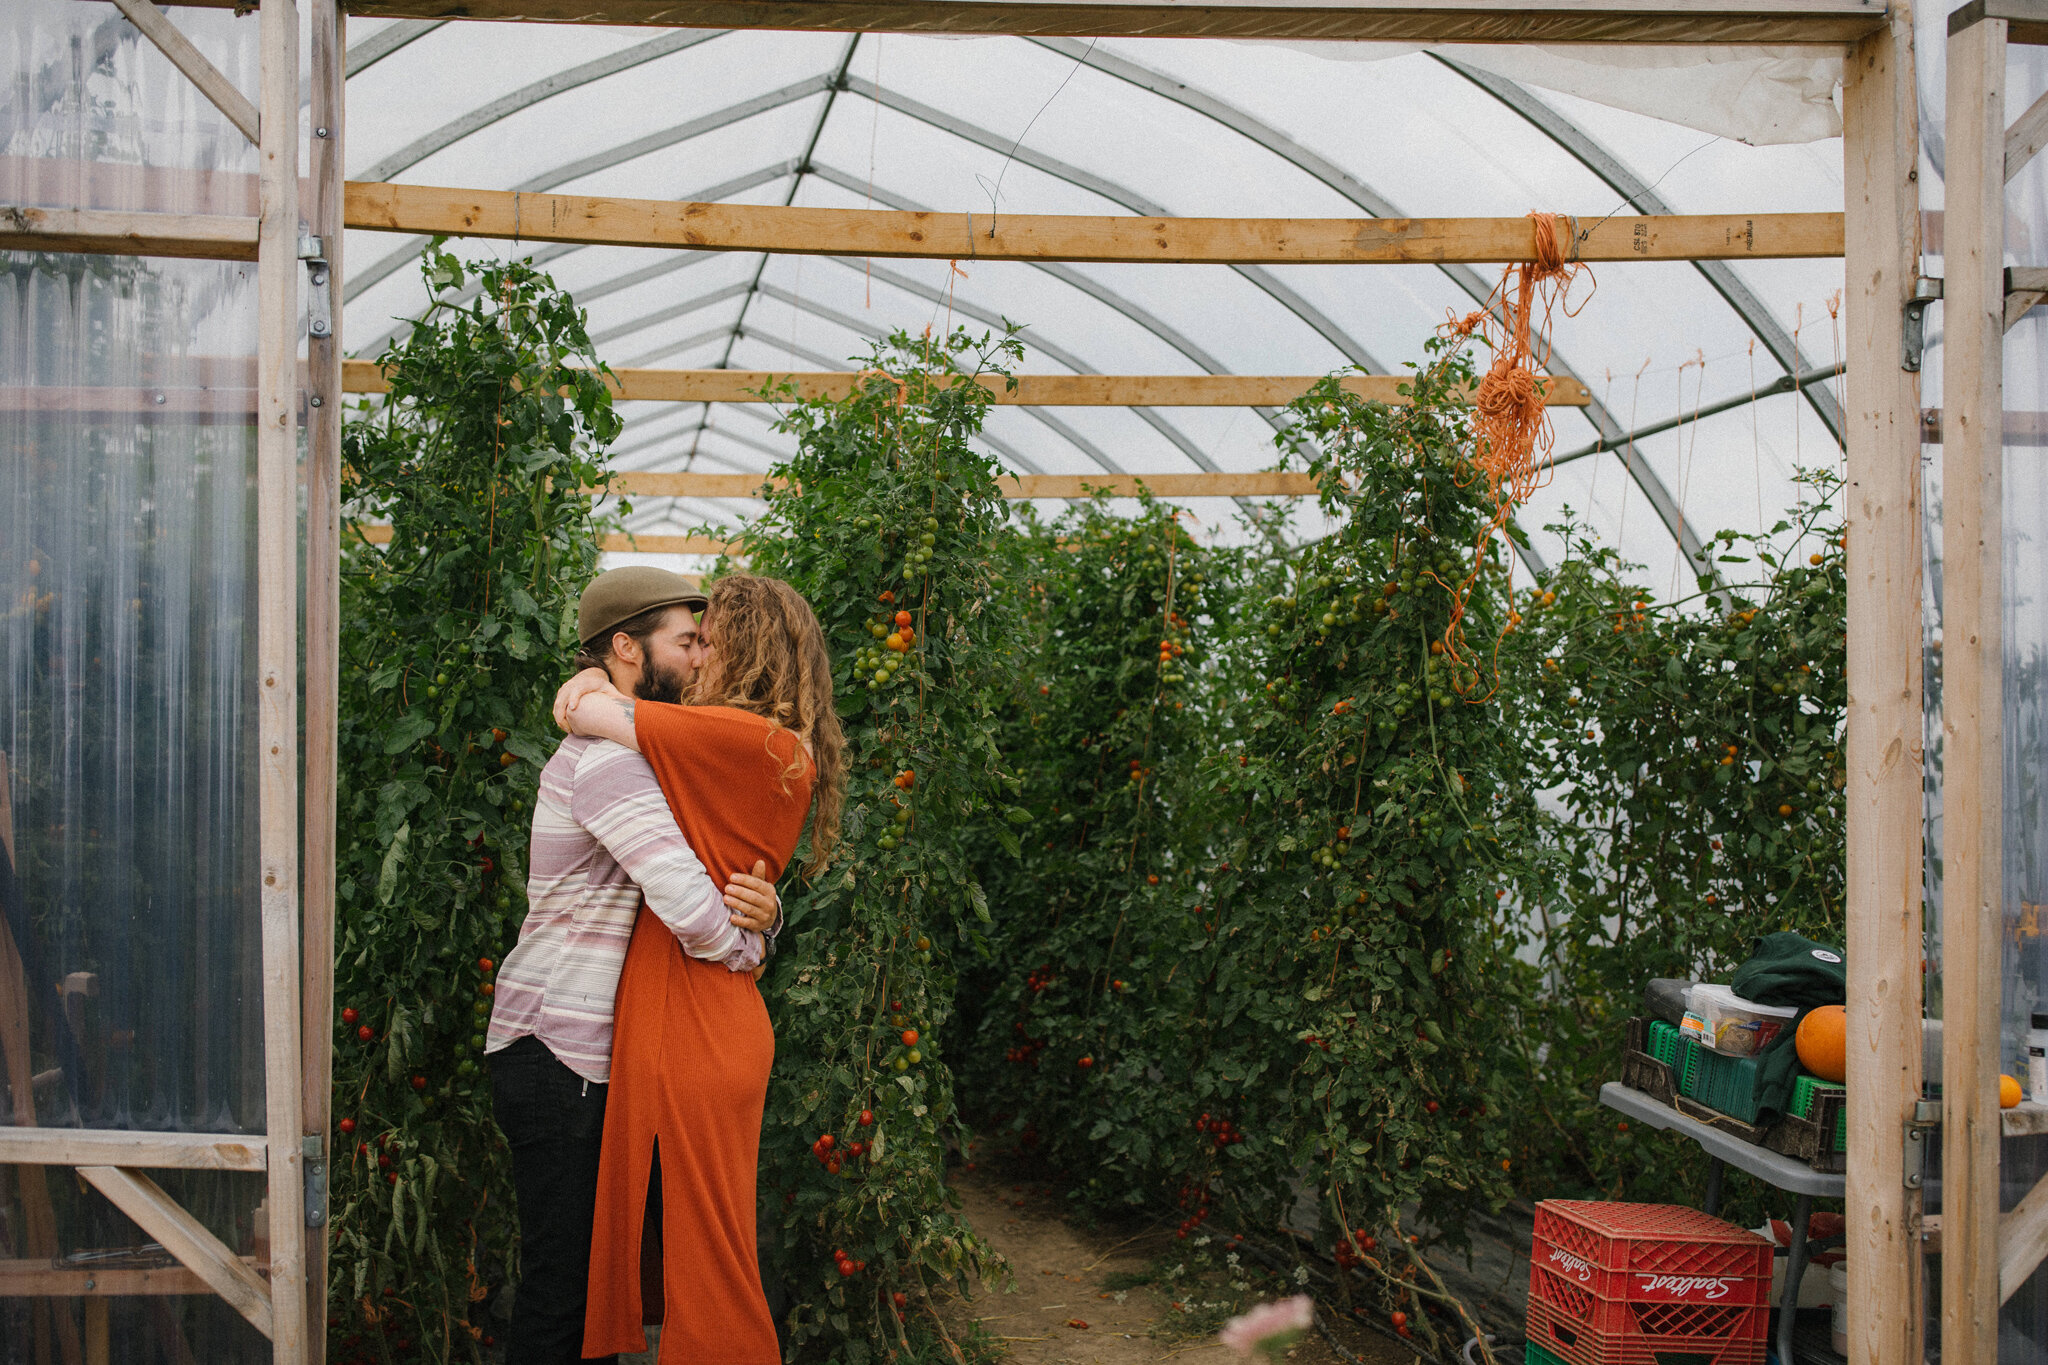 Surprise proposal in the greenhouse at Harvest Moon Farm in Meaf